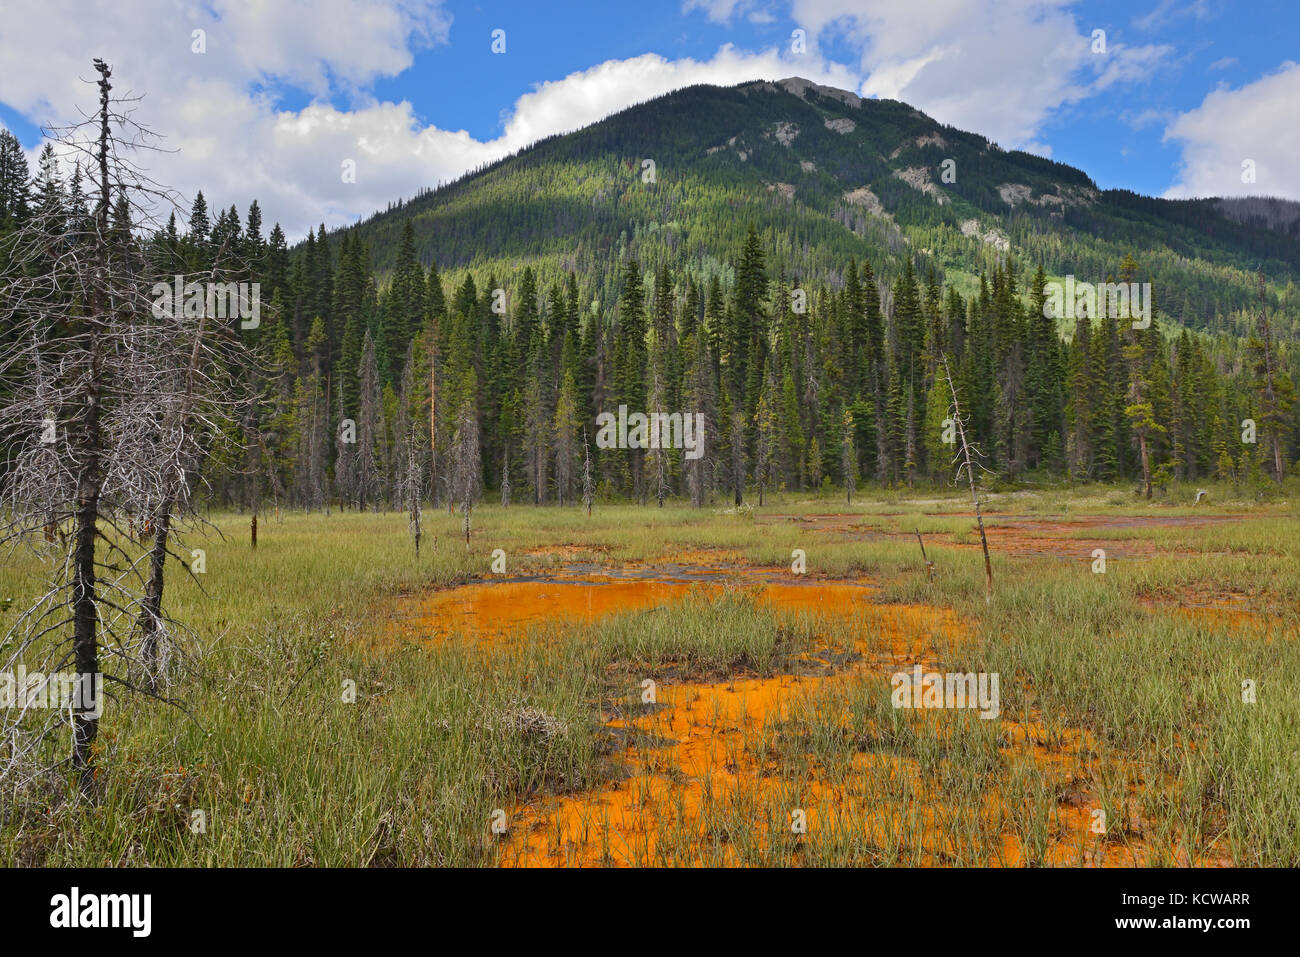 Paint Pots. Iron-rich cold mineral springs.  The Canadian Rocky Mountains, Kootenay National Park, British Columbia, Canada Stock Photo